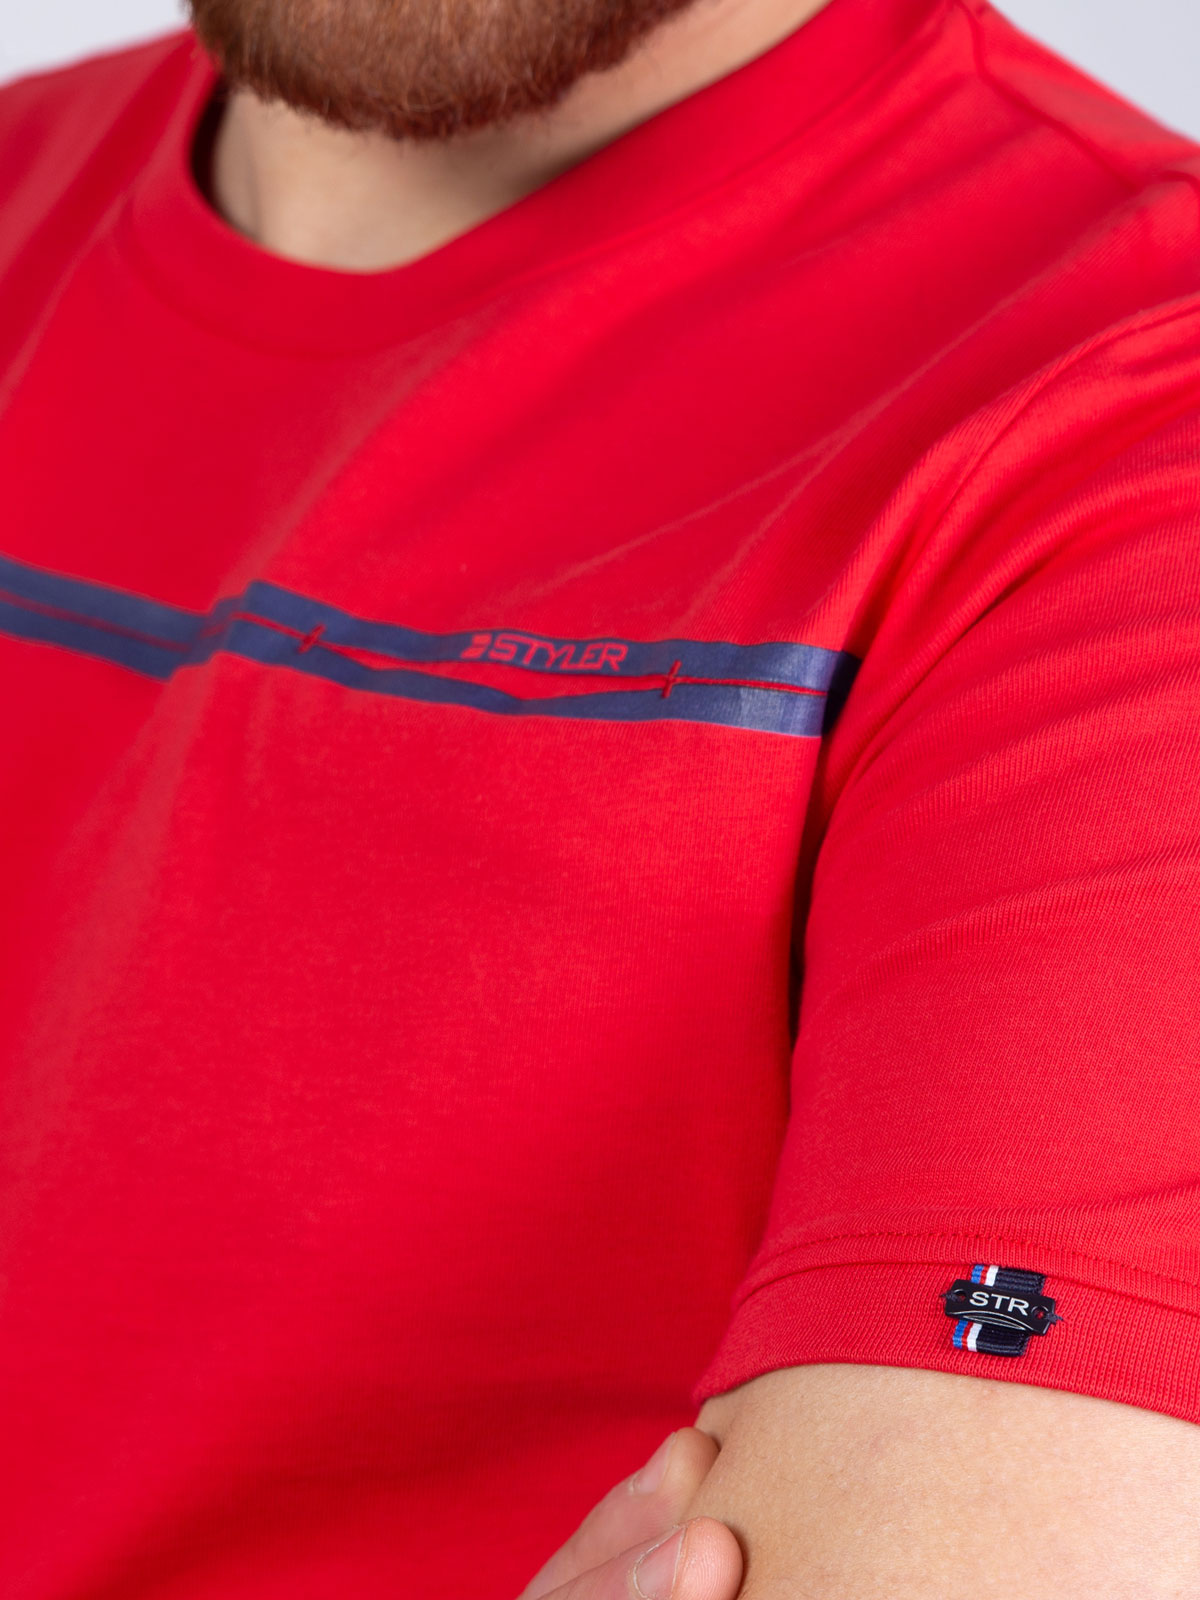 Red tshirt with blue print - 96389 € 12.37 img2